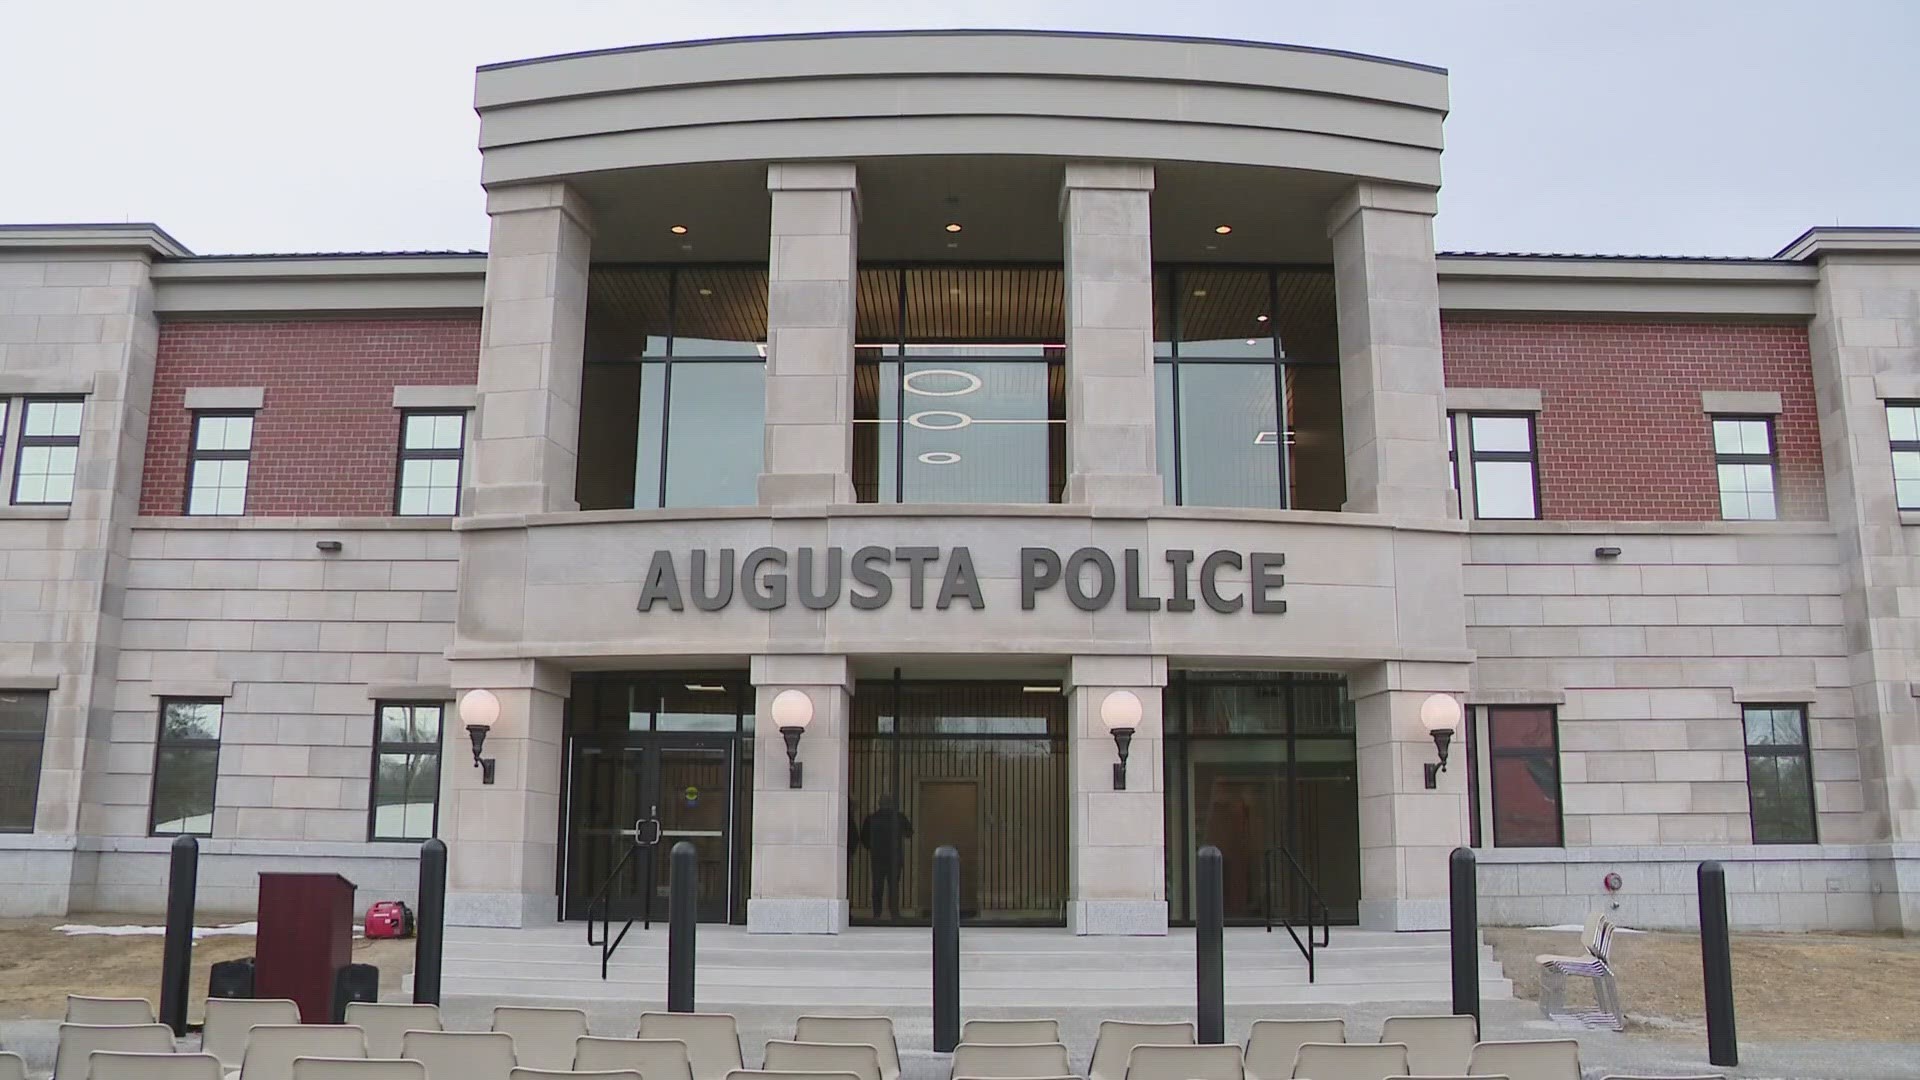 After its groundbreaking in November 2022, city leaders and law enforcement staff unveiled the new police station at a press conference Tuesday.